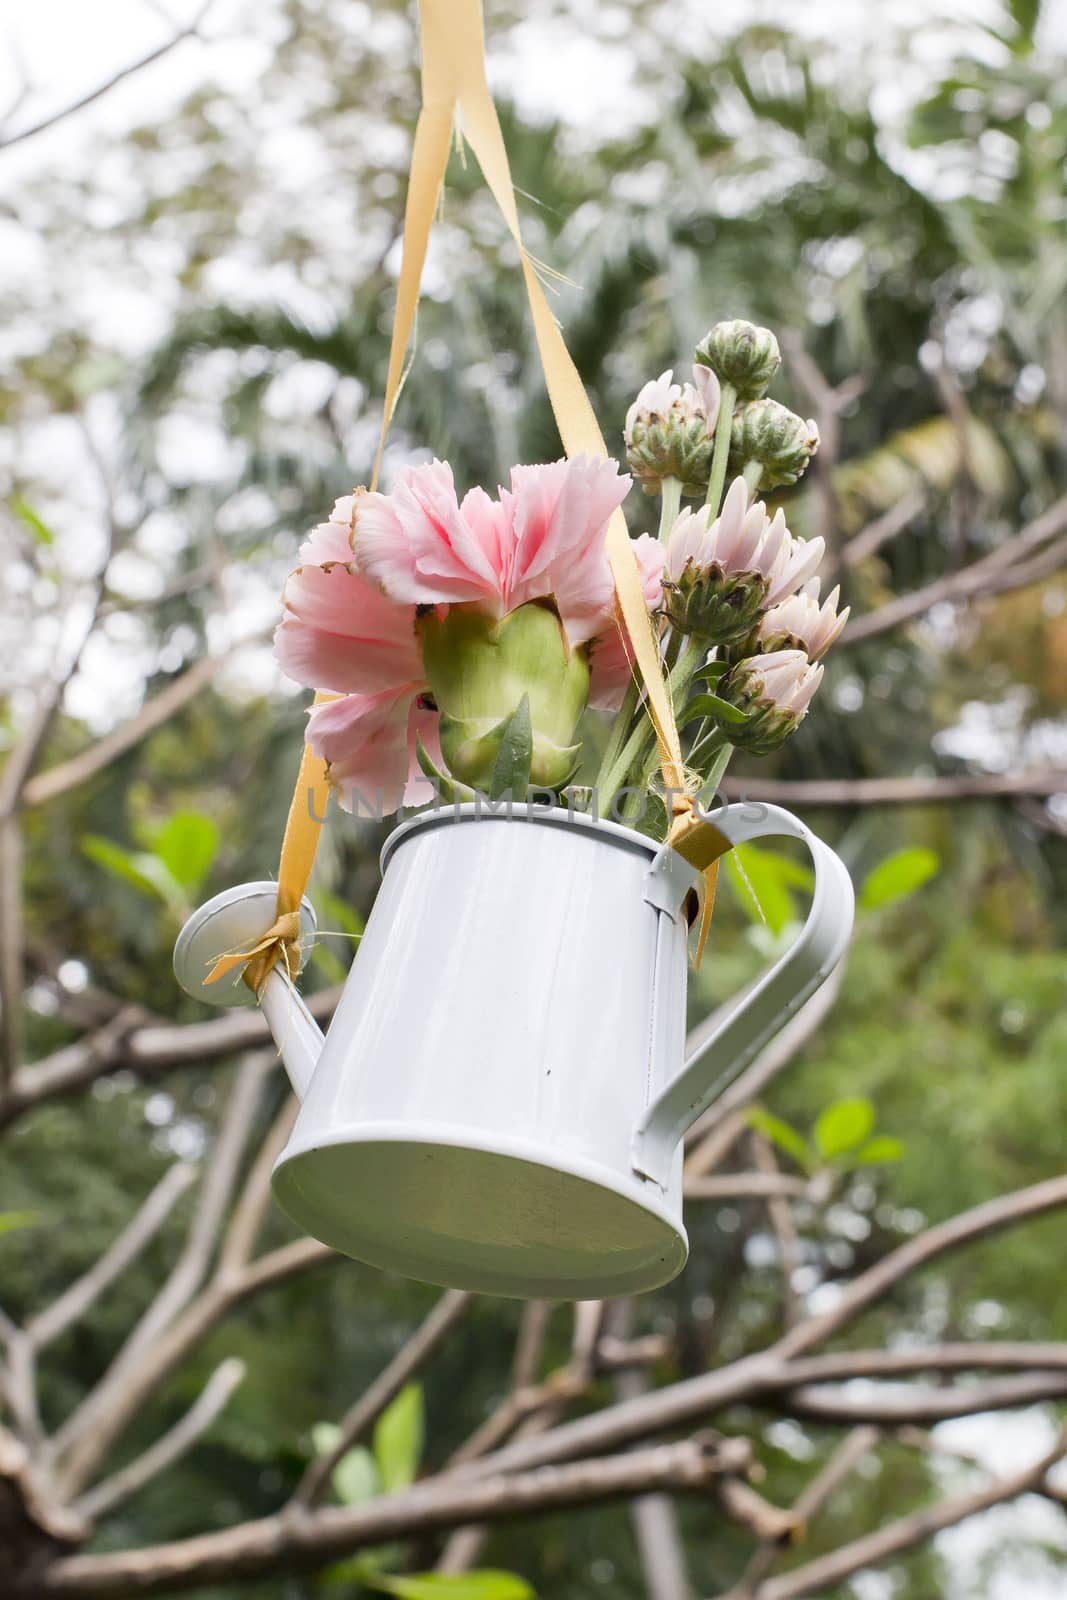 Hanging of flowers and watering can decorate in garden